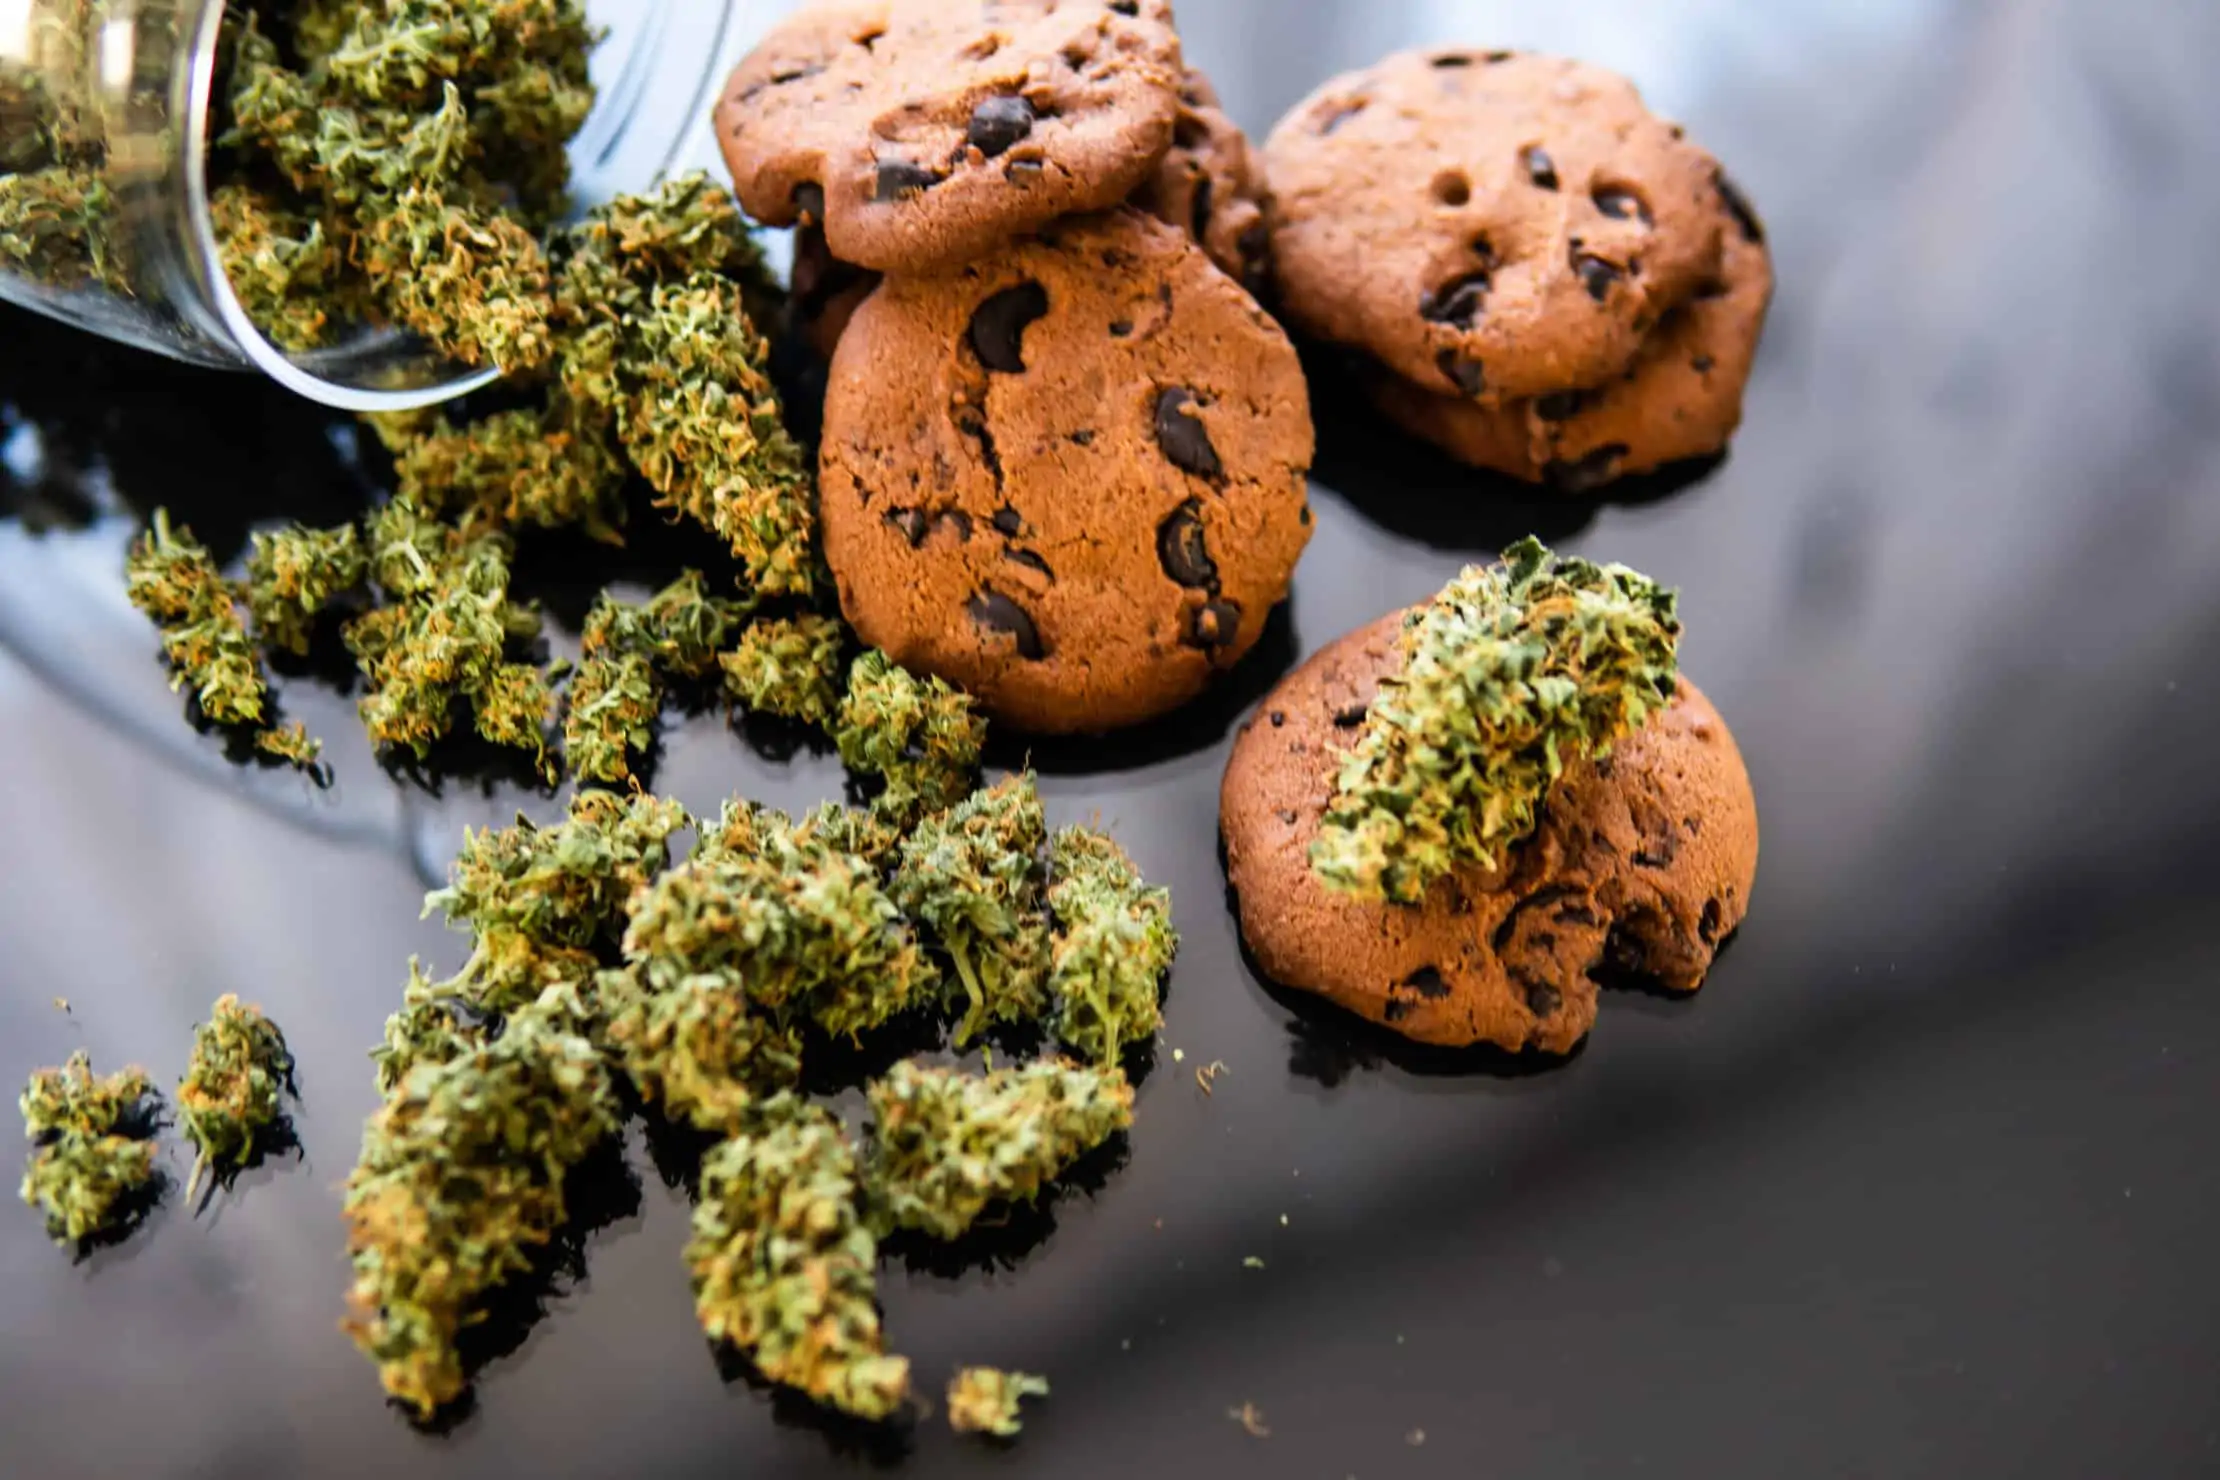 5 Cannabis Cookbooks to Satisfy Your Munchies